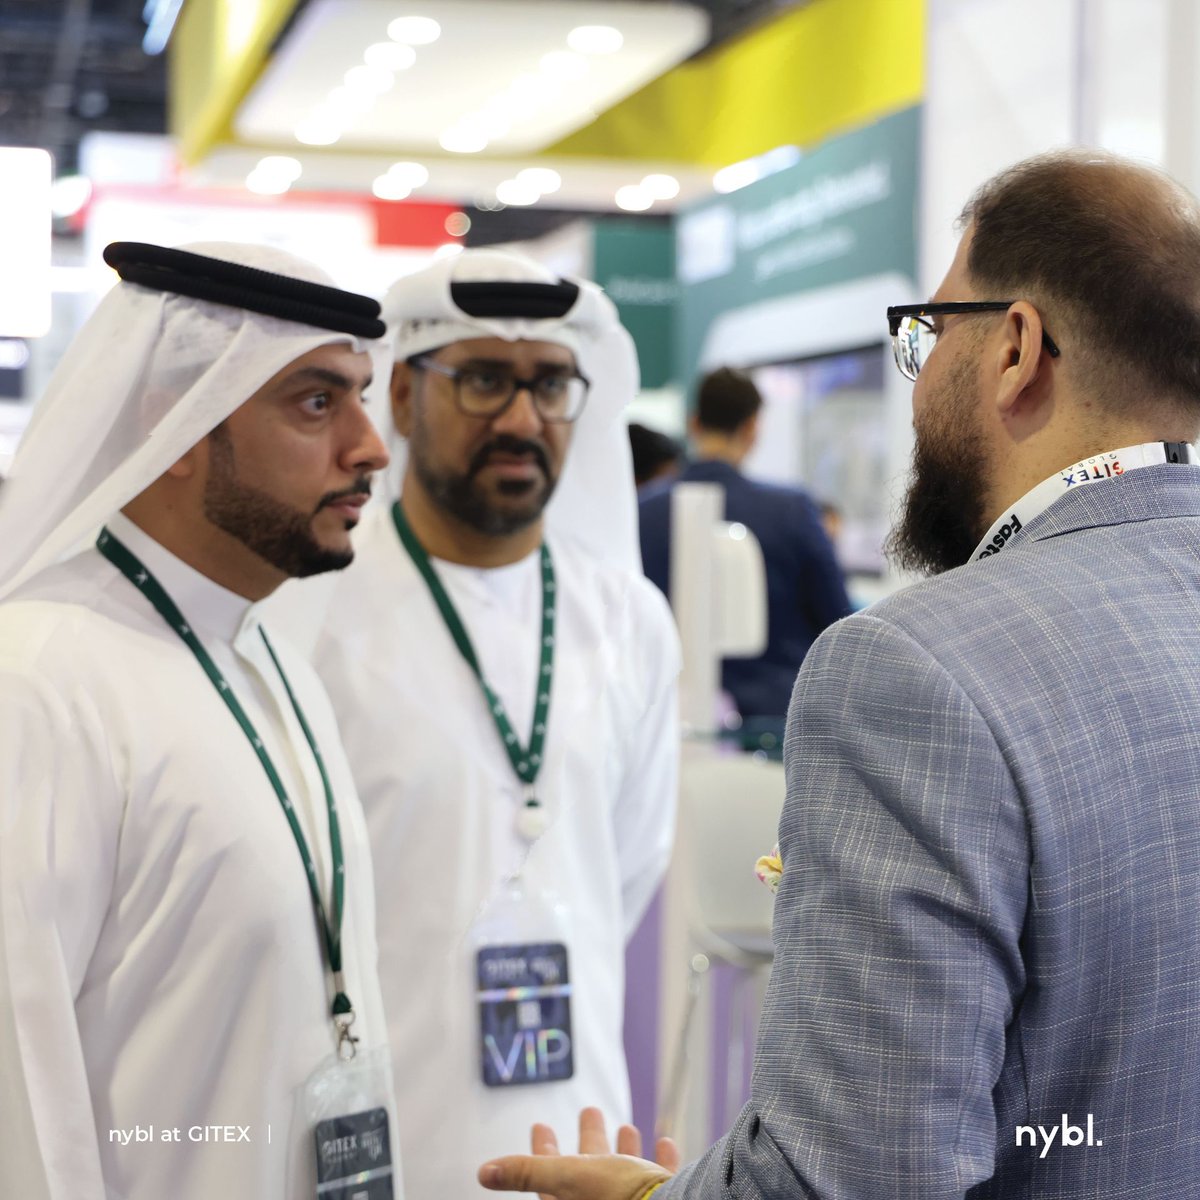 Thuraya Telecommunications' CEO, Sulaiman Al Ali’s discussions at #Gitex with nybl’s CEO Noor Alnahhas, on how leveraging #Ai alongside #SatelliteCommunications is changing our future for the better. 

Follow Thuraya and nybl for latest industry developments.

#nybl_is_everywhere